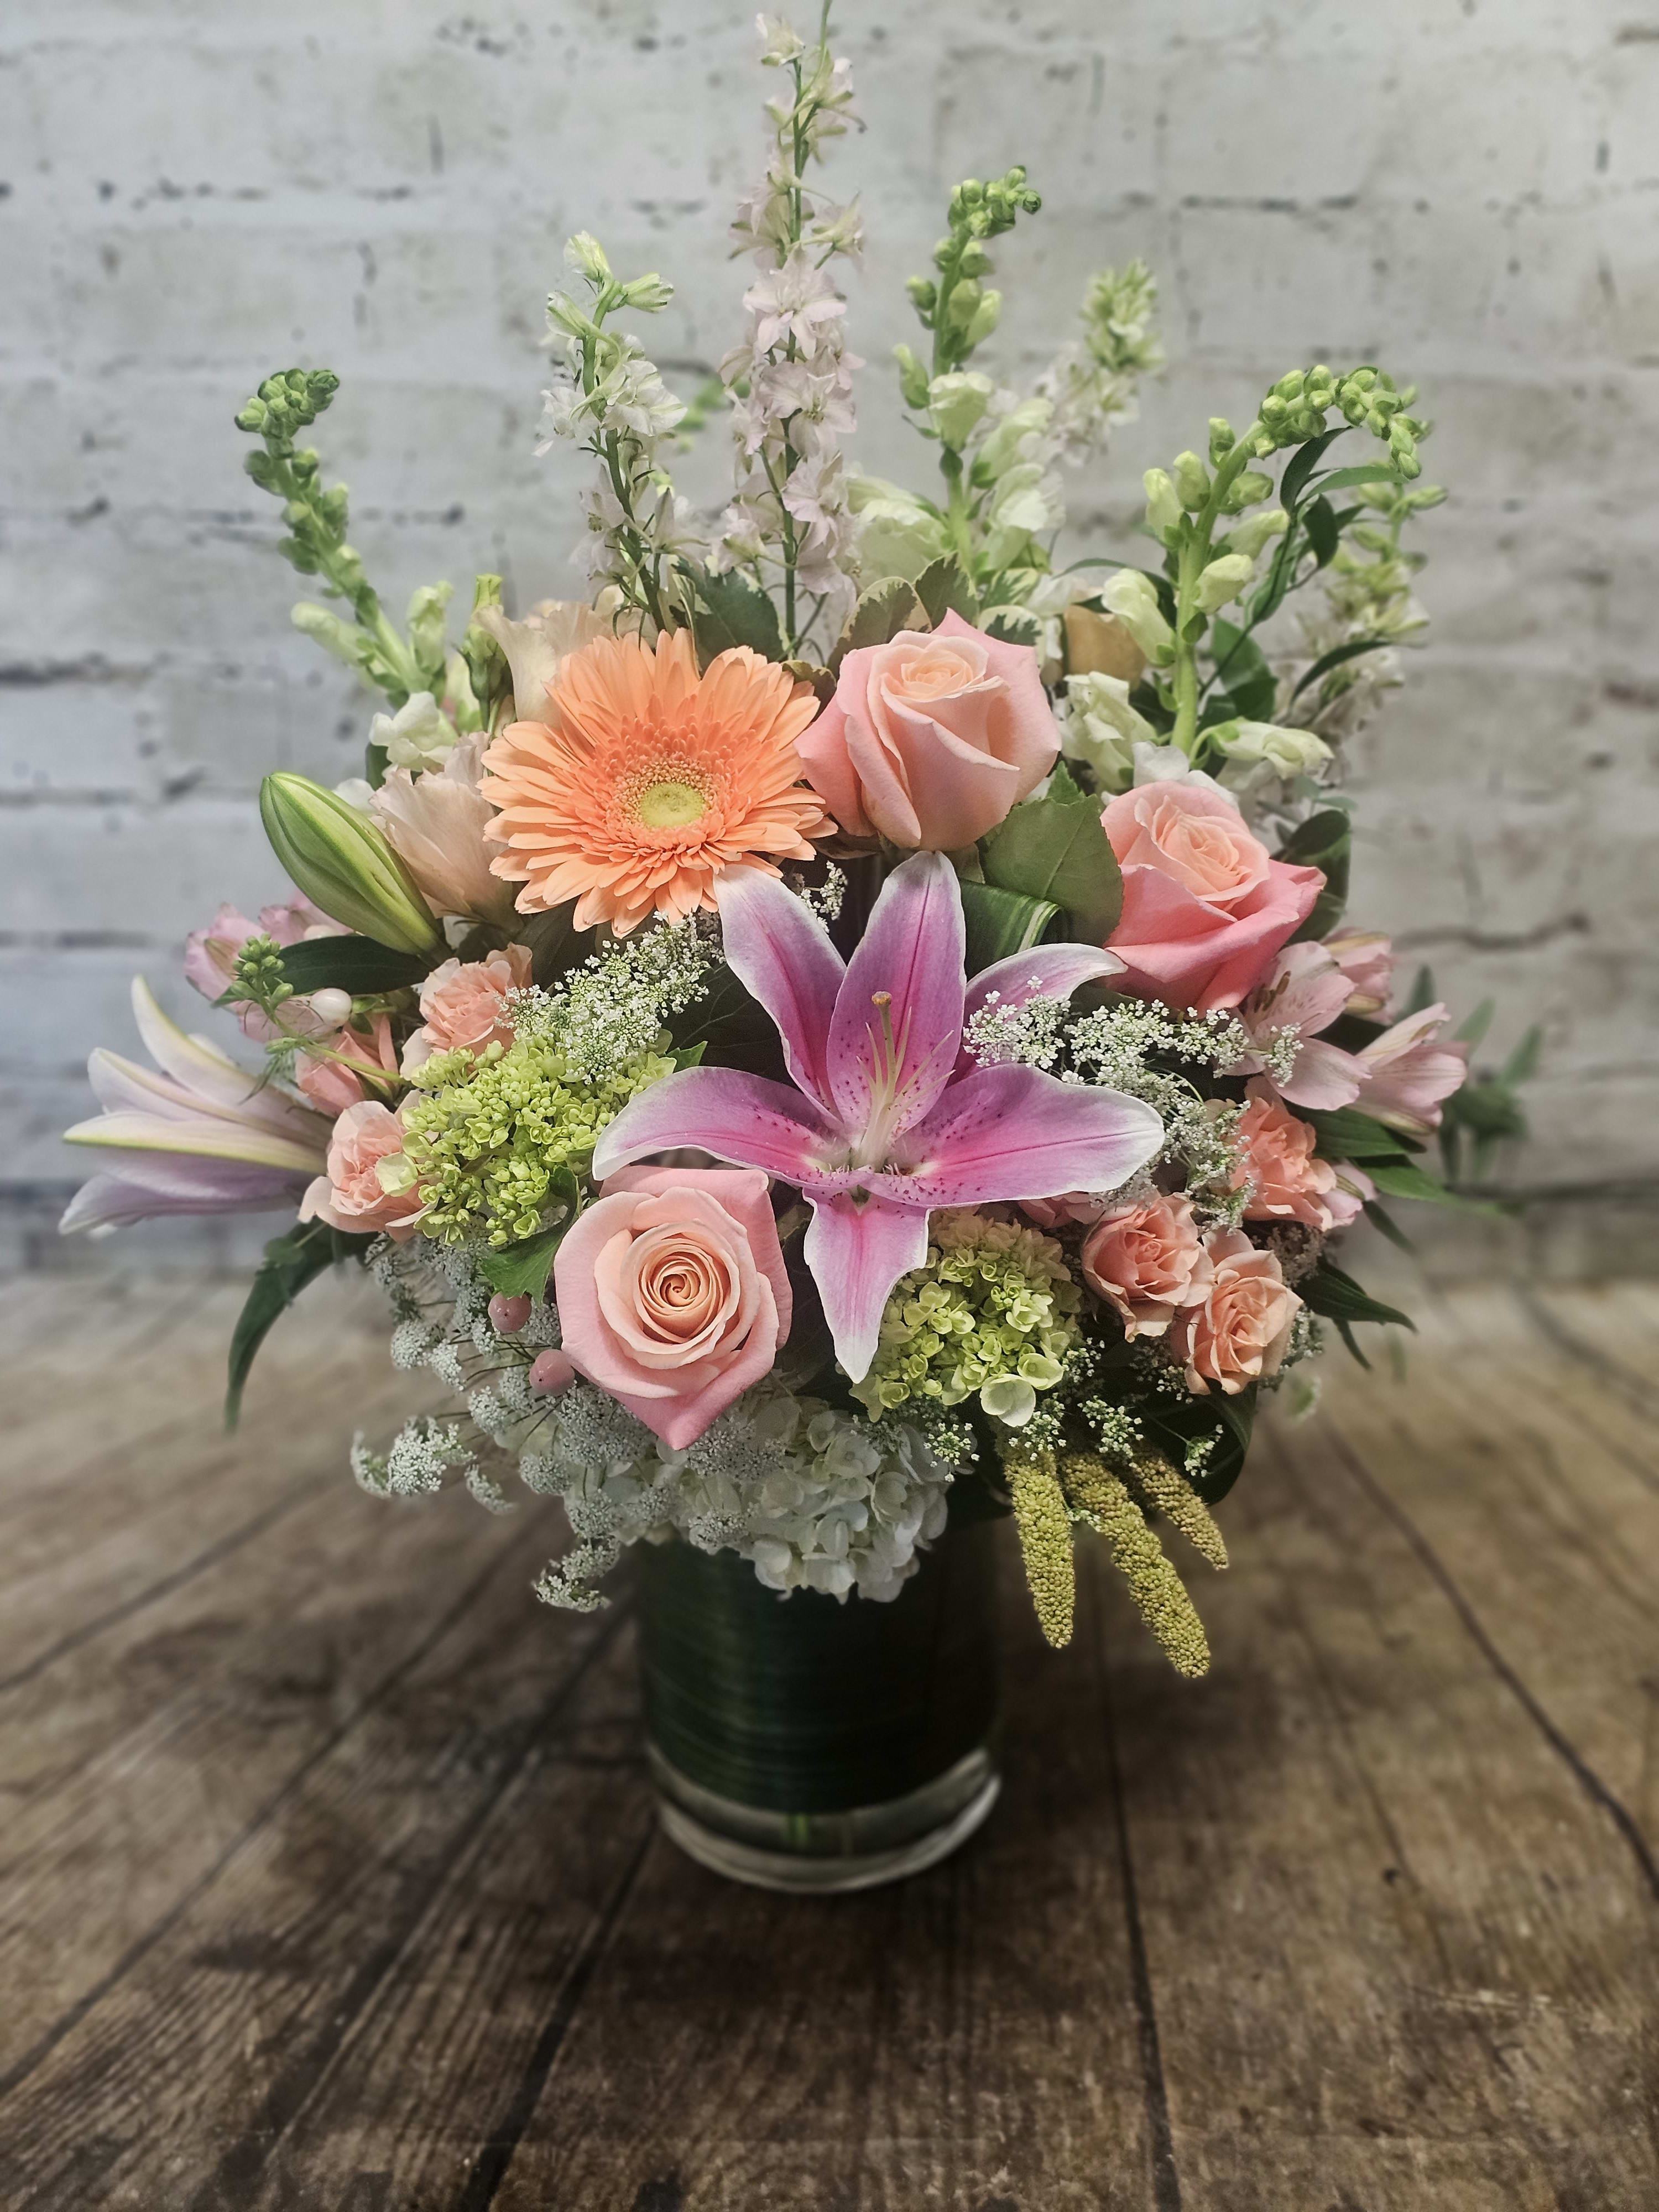 Heavenly Halo - A beautiful garden assortment in soft and sweet pastel colors. 